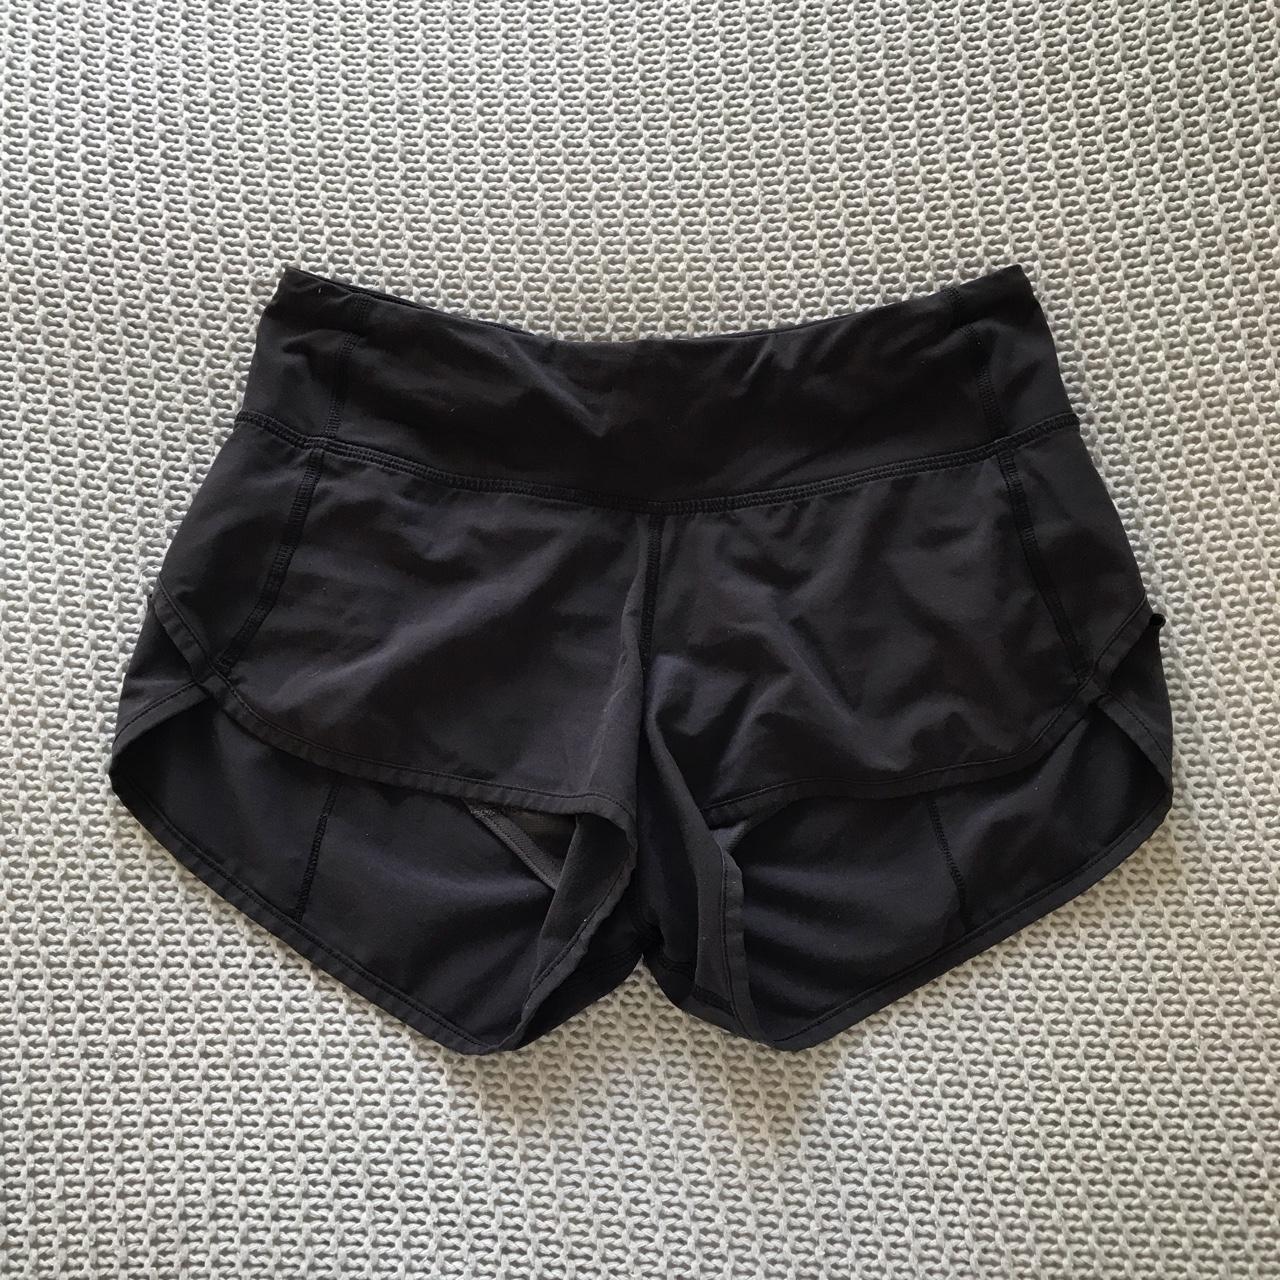 lululemon shorts, size 2 but fits a 4 too imo (size